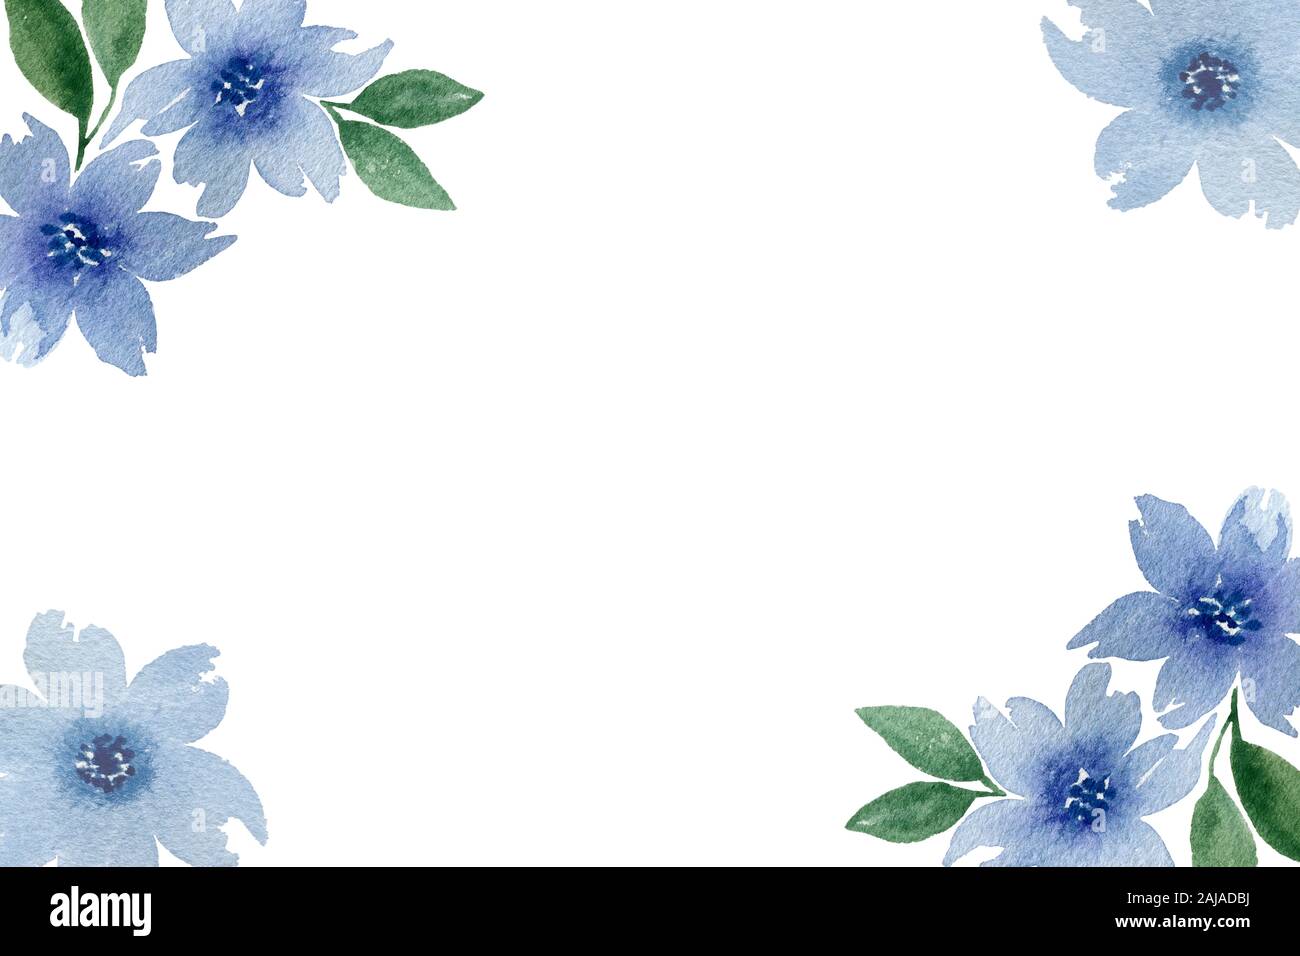 Floral Border With Blue Watercolor Flowers And Copy Space Watercolor Illustration Design For Wedding Card Or Invitation Stock Photo Alamy